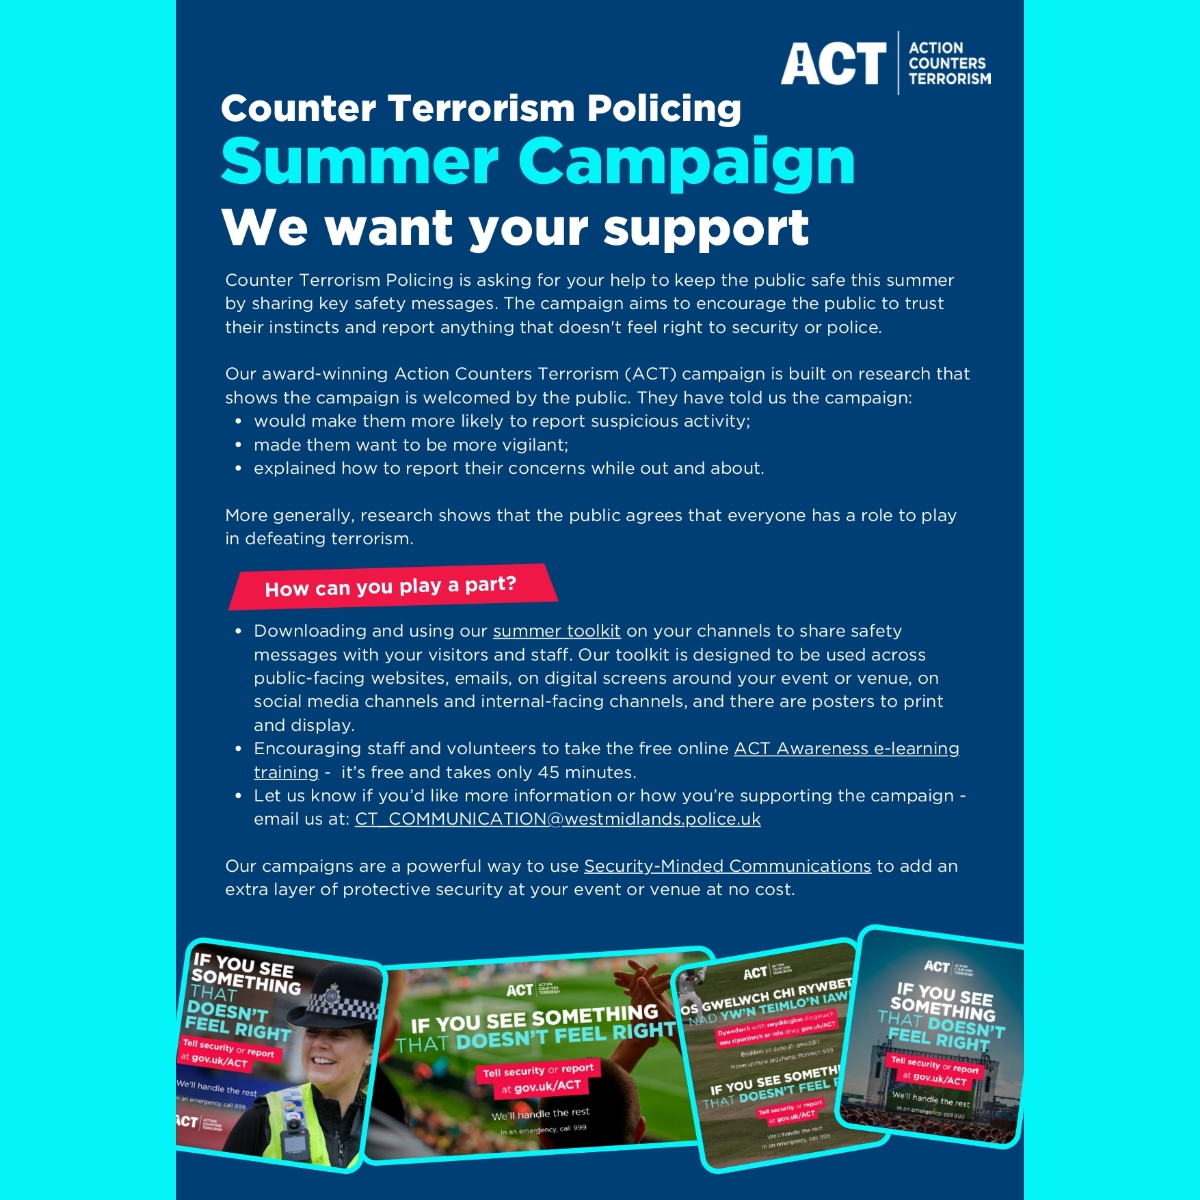 Counter Terrorism Policing #BeSafeBeSound using the toolkit protectuk.police.uk/digital-toolki…